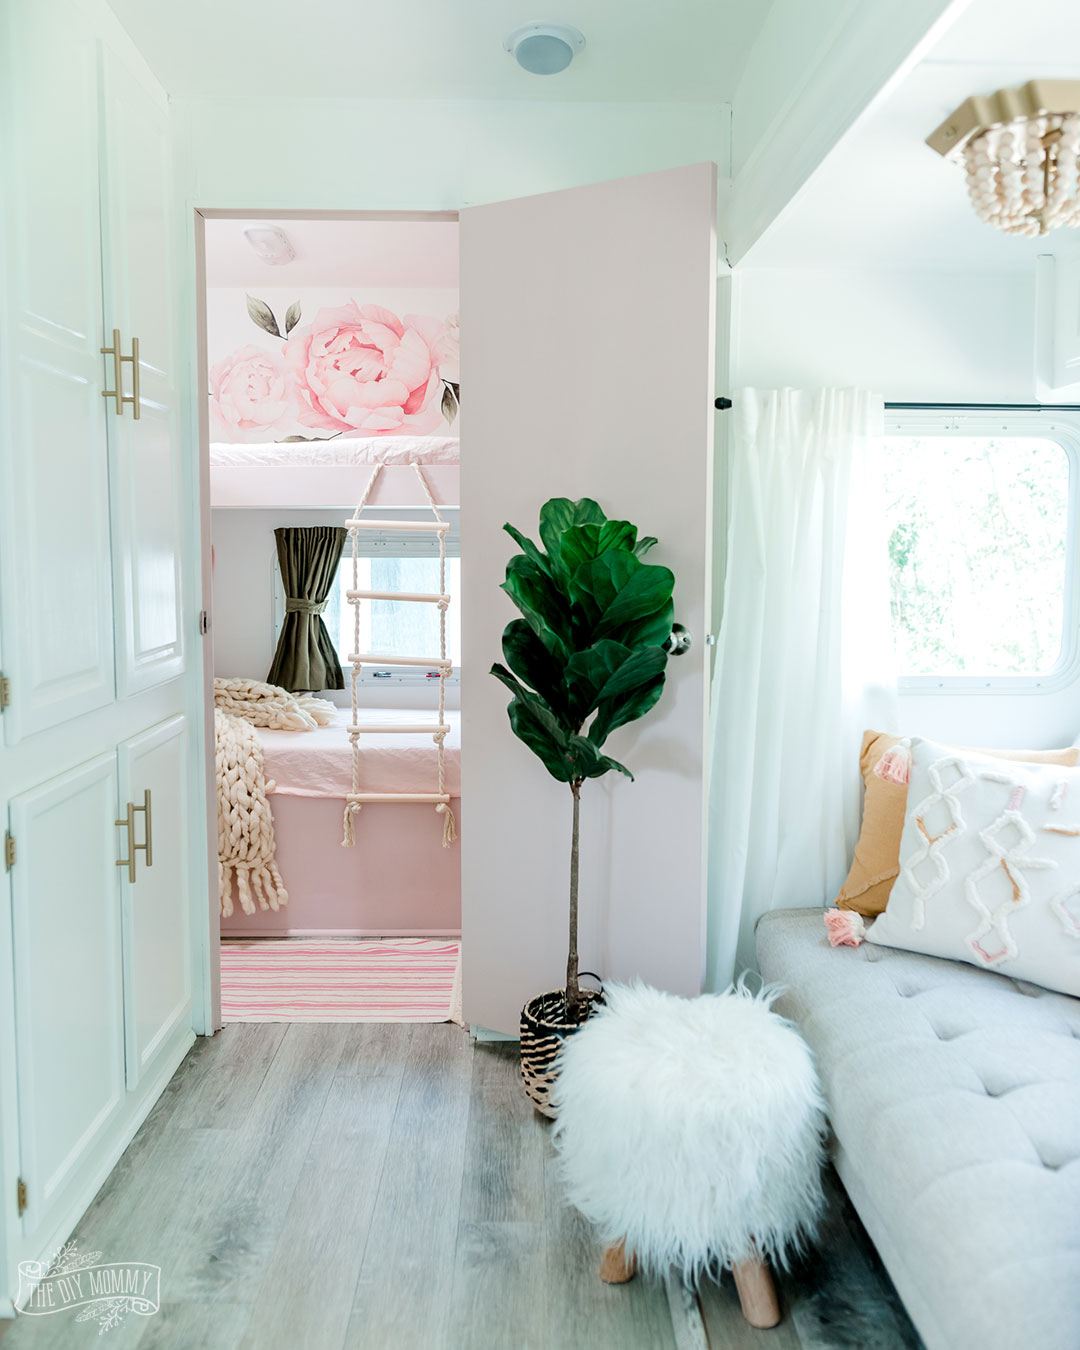 A dated RV bunk room is transformed into a pink & floral oasis for three girls.